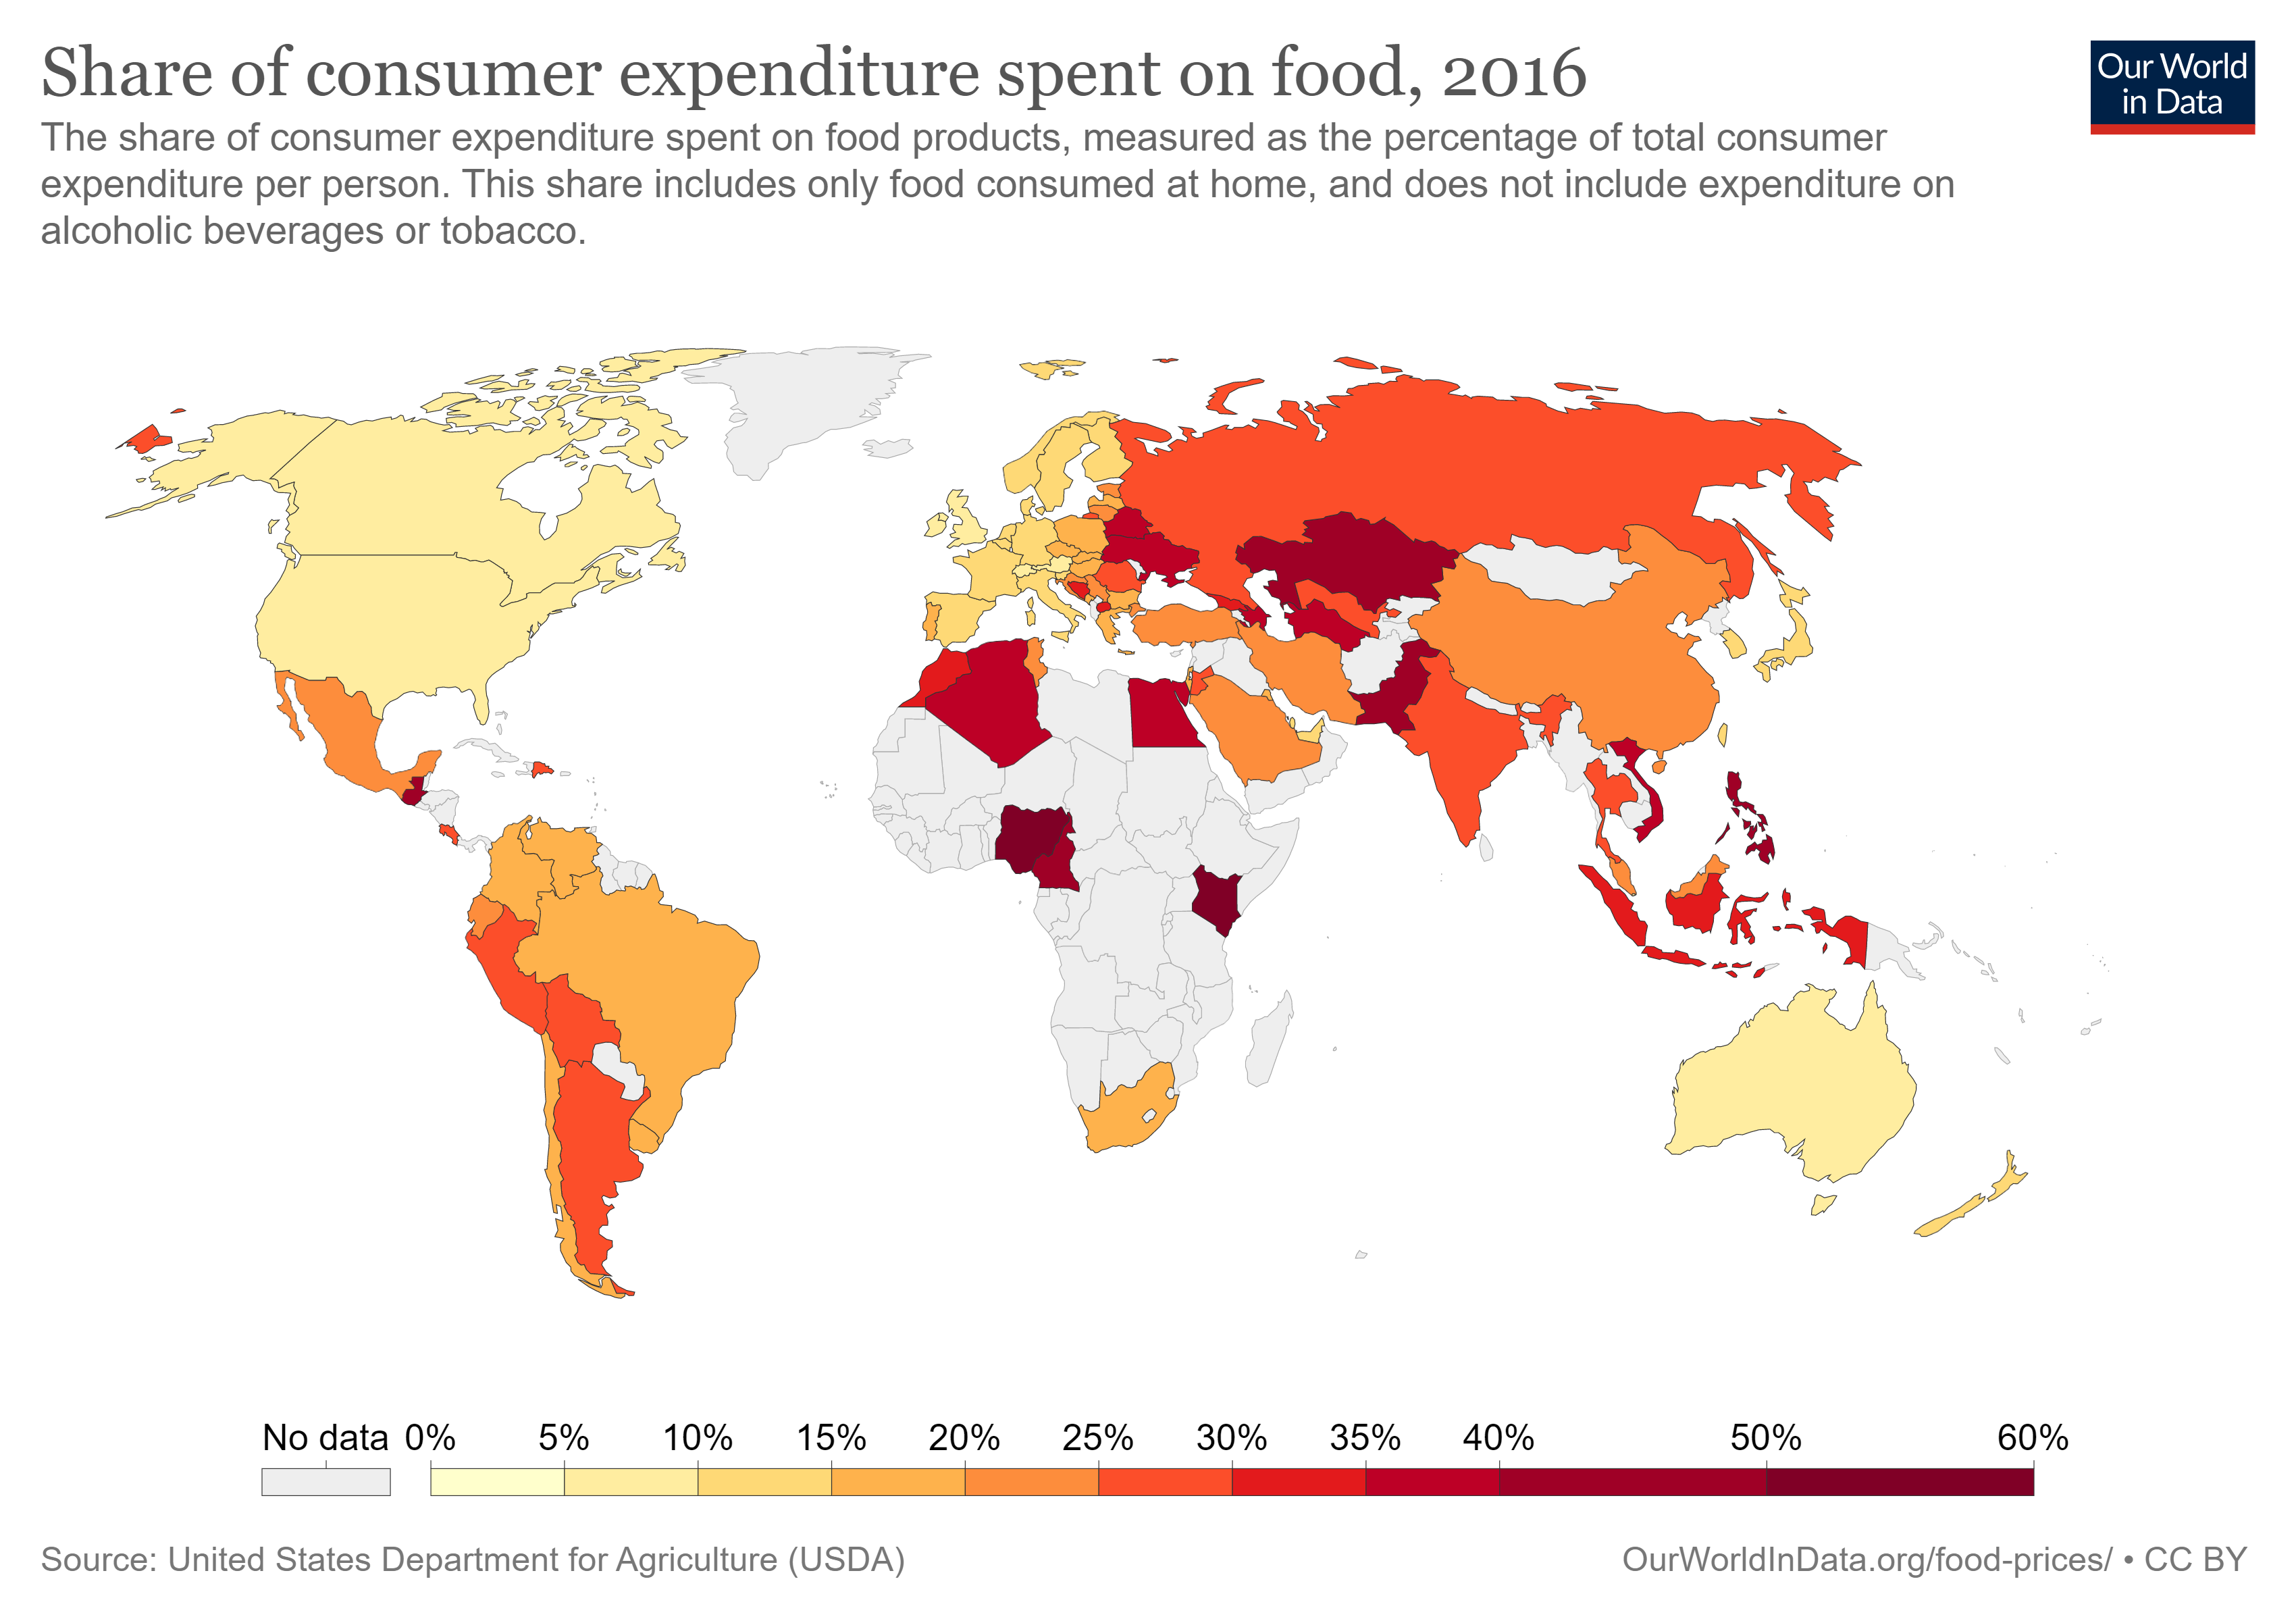 share-of-consumer-expenditure-spent-on-food.png